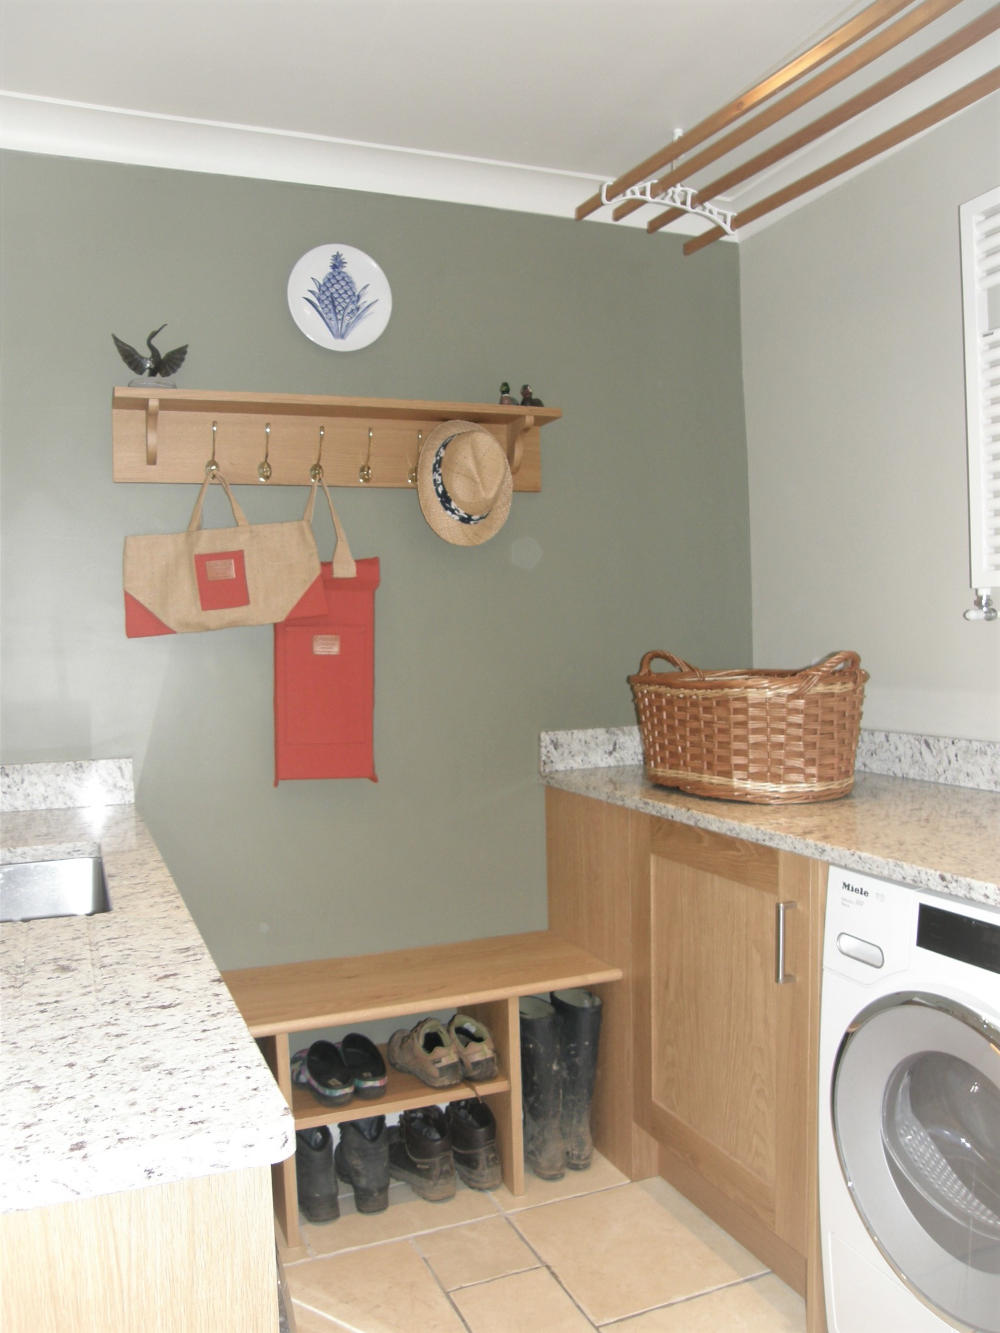 A dreamy boot room / utility room